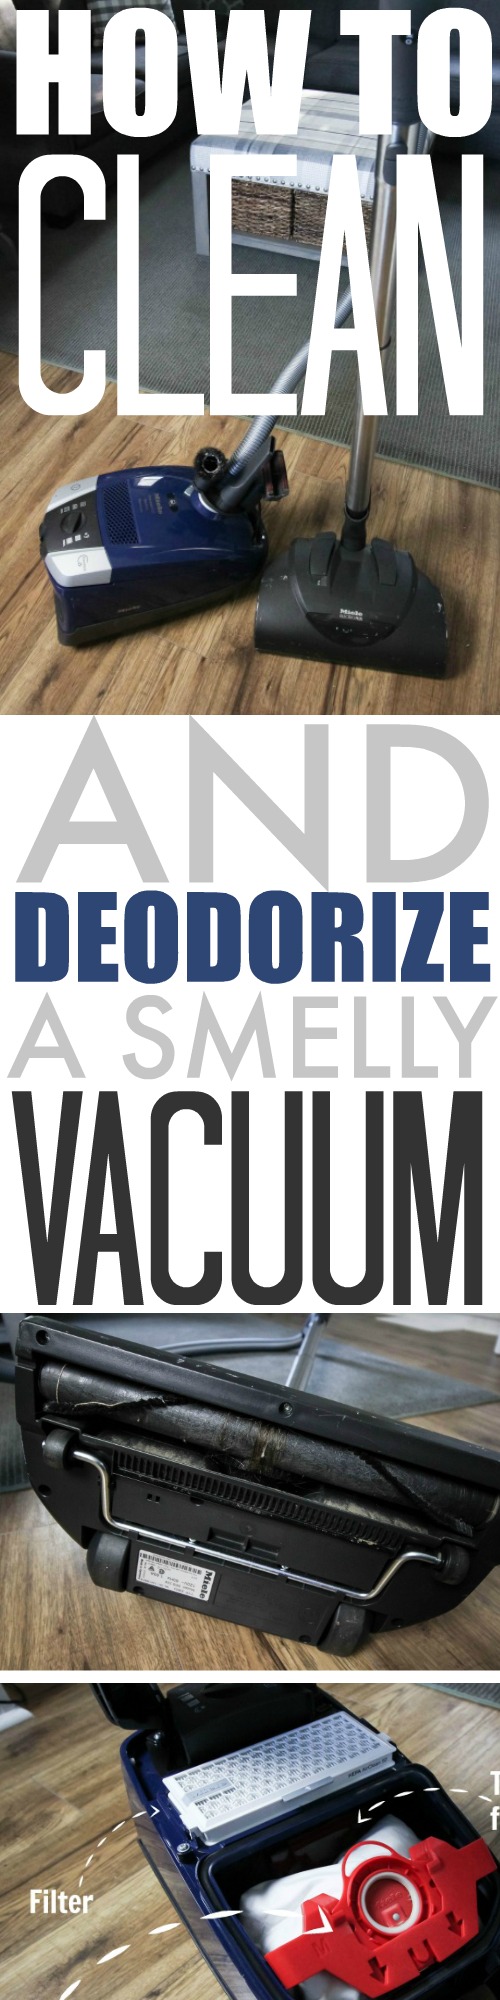 If your vacuum smells bad you really need this tip! Here's how to deodorize your vacuum cleaner so you can breathe freely again.